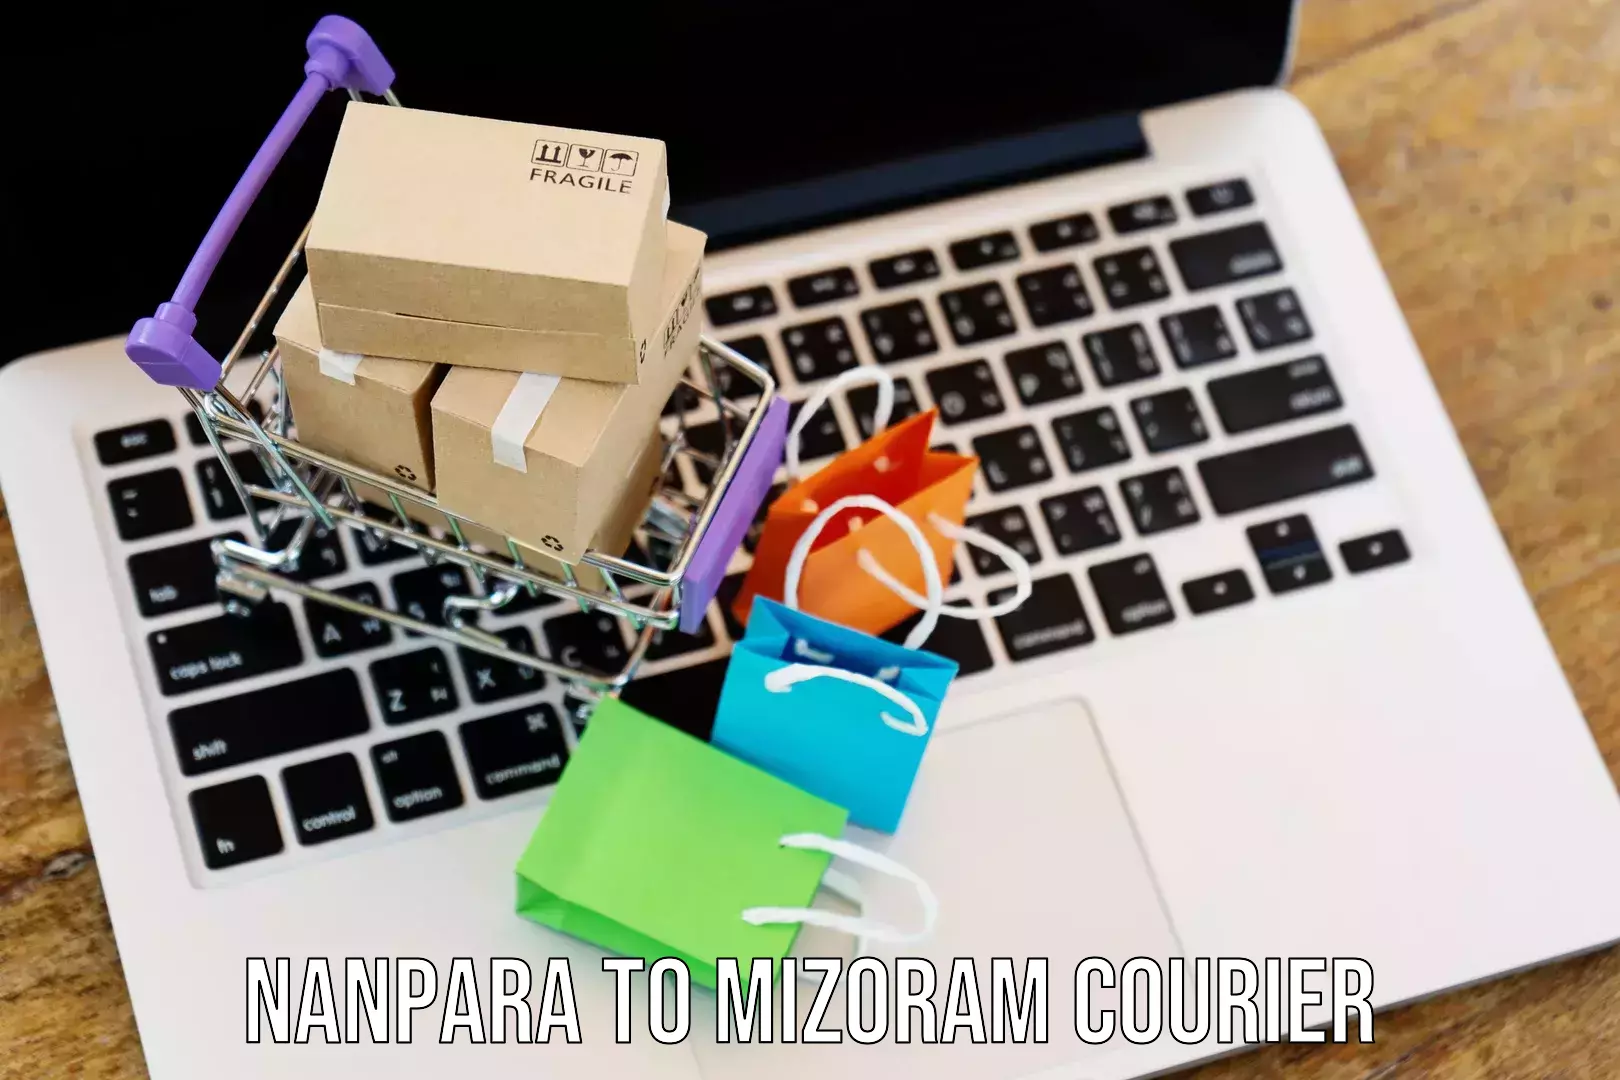 State-of-the-art courier technology Nanpara to Mizoram